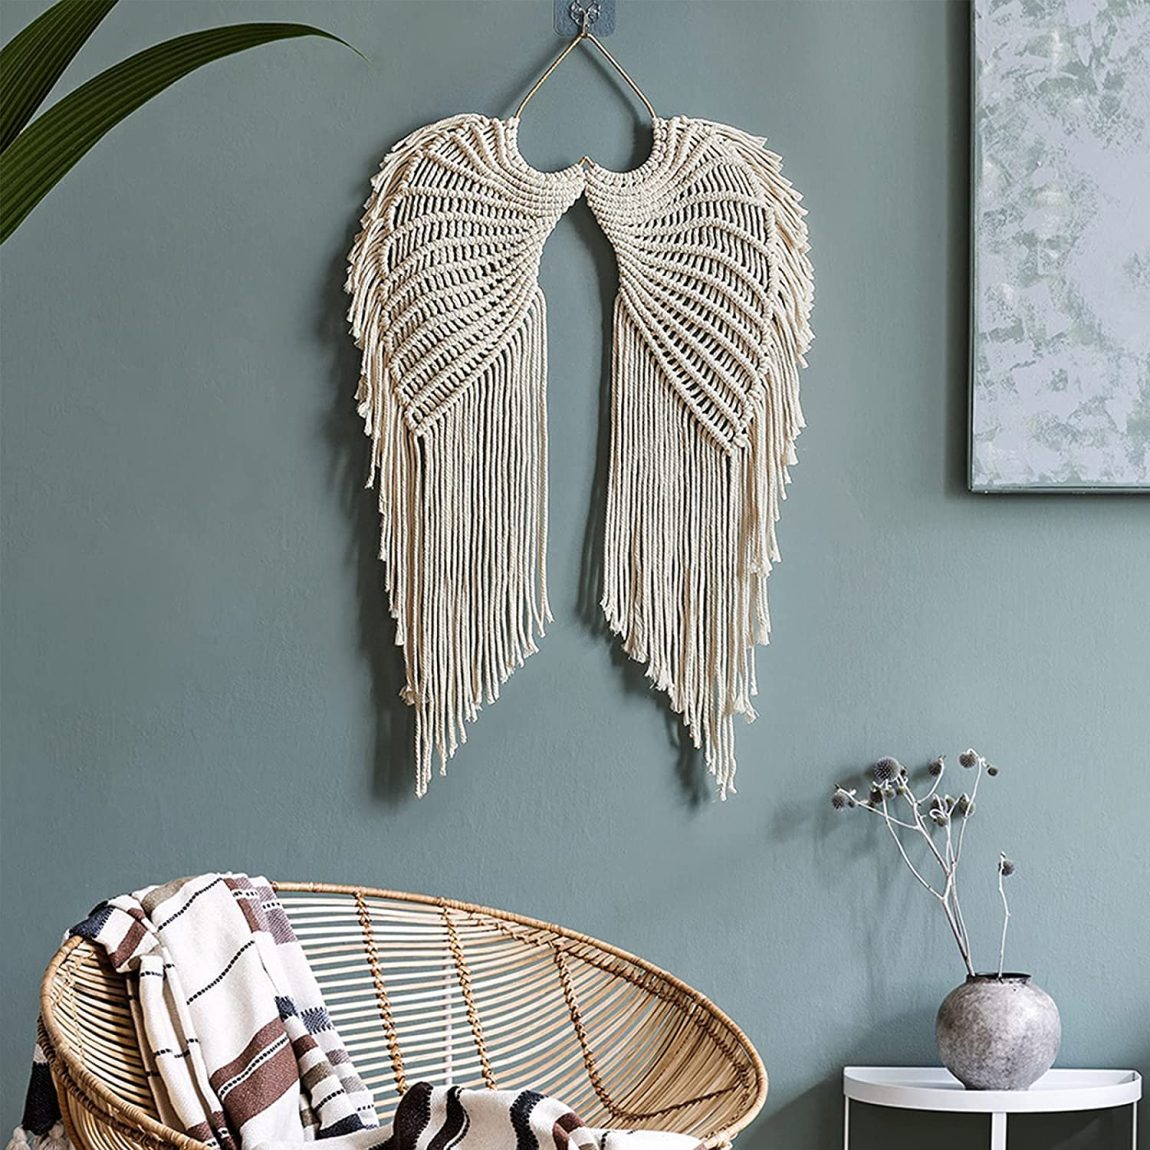 Angel wings Macrame Wall Hanging, Woven Cotton Rope Handmade Cotton Woven Hanging Tapestry Dream Catcher Art Decoration - Where to Buy Large Macrame Hanging Wall Decor - Macrame hanging | Macrame planter | Macrame curtains | Macrame ideas | Macrame decor | Macrame circle | Macrame hanger | Hanging macrame | Textile inspiration | Textile art | Textile love | Textile fabric | Textile design | Woven hanging | Textile fabric